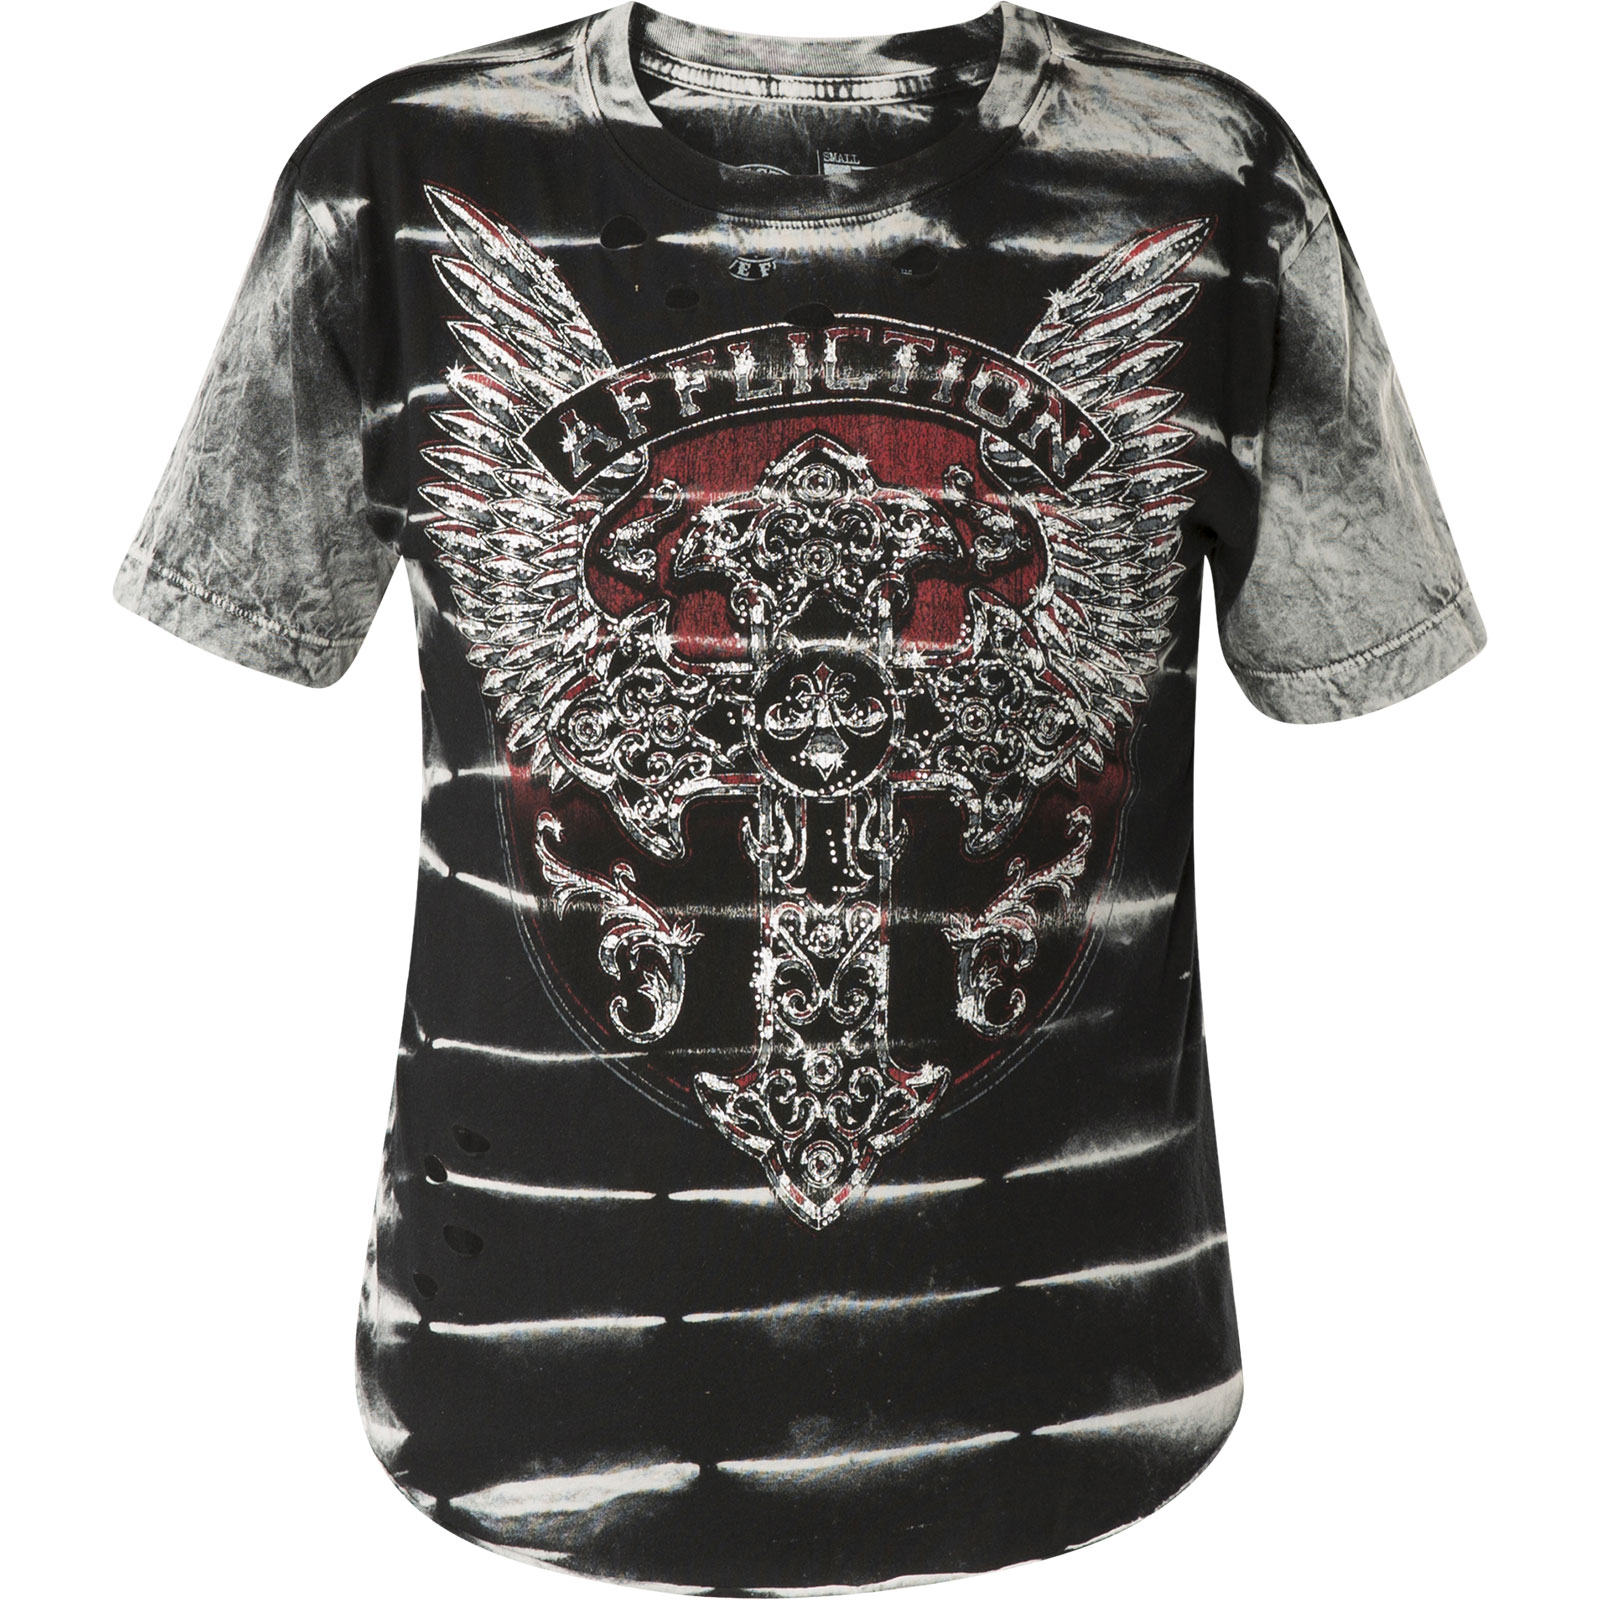 Affliction T-Shirt Congregation Chrome featuring large wings and lettering